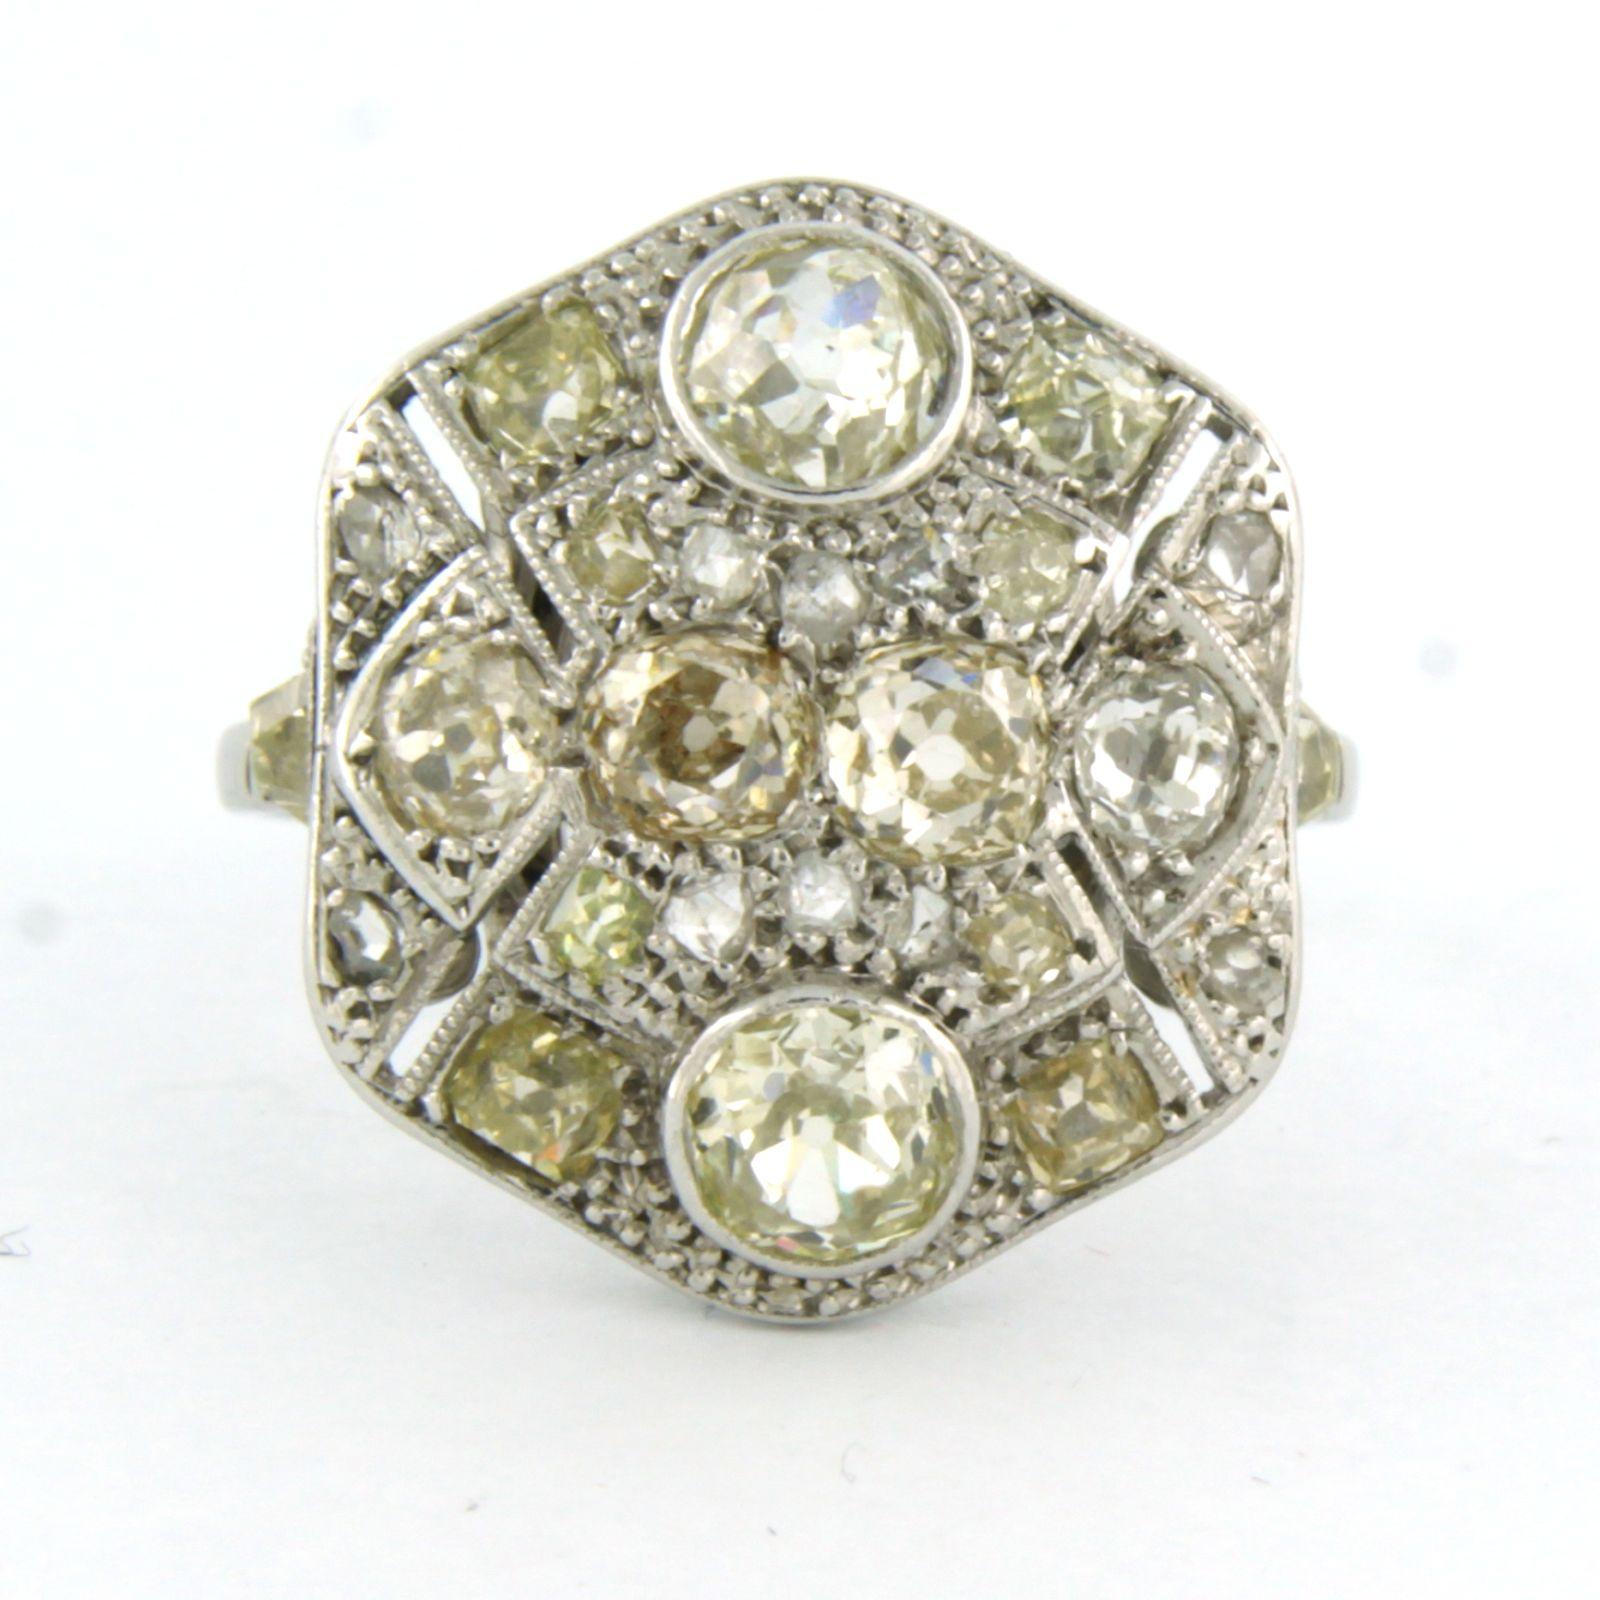 ART NOUVEAU - 18k white gold ring set with old mine cut and rose cut diamonds. 3.20ct – ring size US. 8 - EU. 18.25(57)

Detailed description

the top of the ring is 2.0 cm wide

Ring size US 8 - EU. 18.25(57), ring can be enlarged or reduced a few